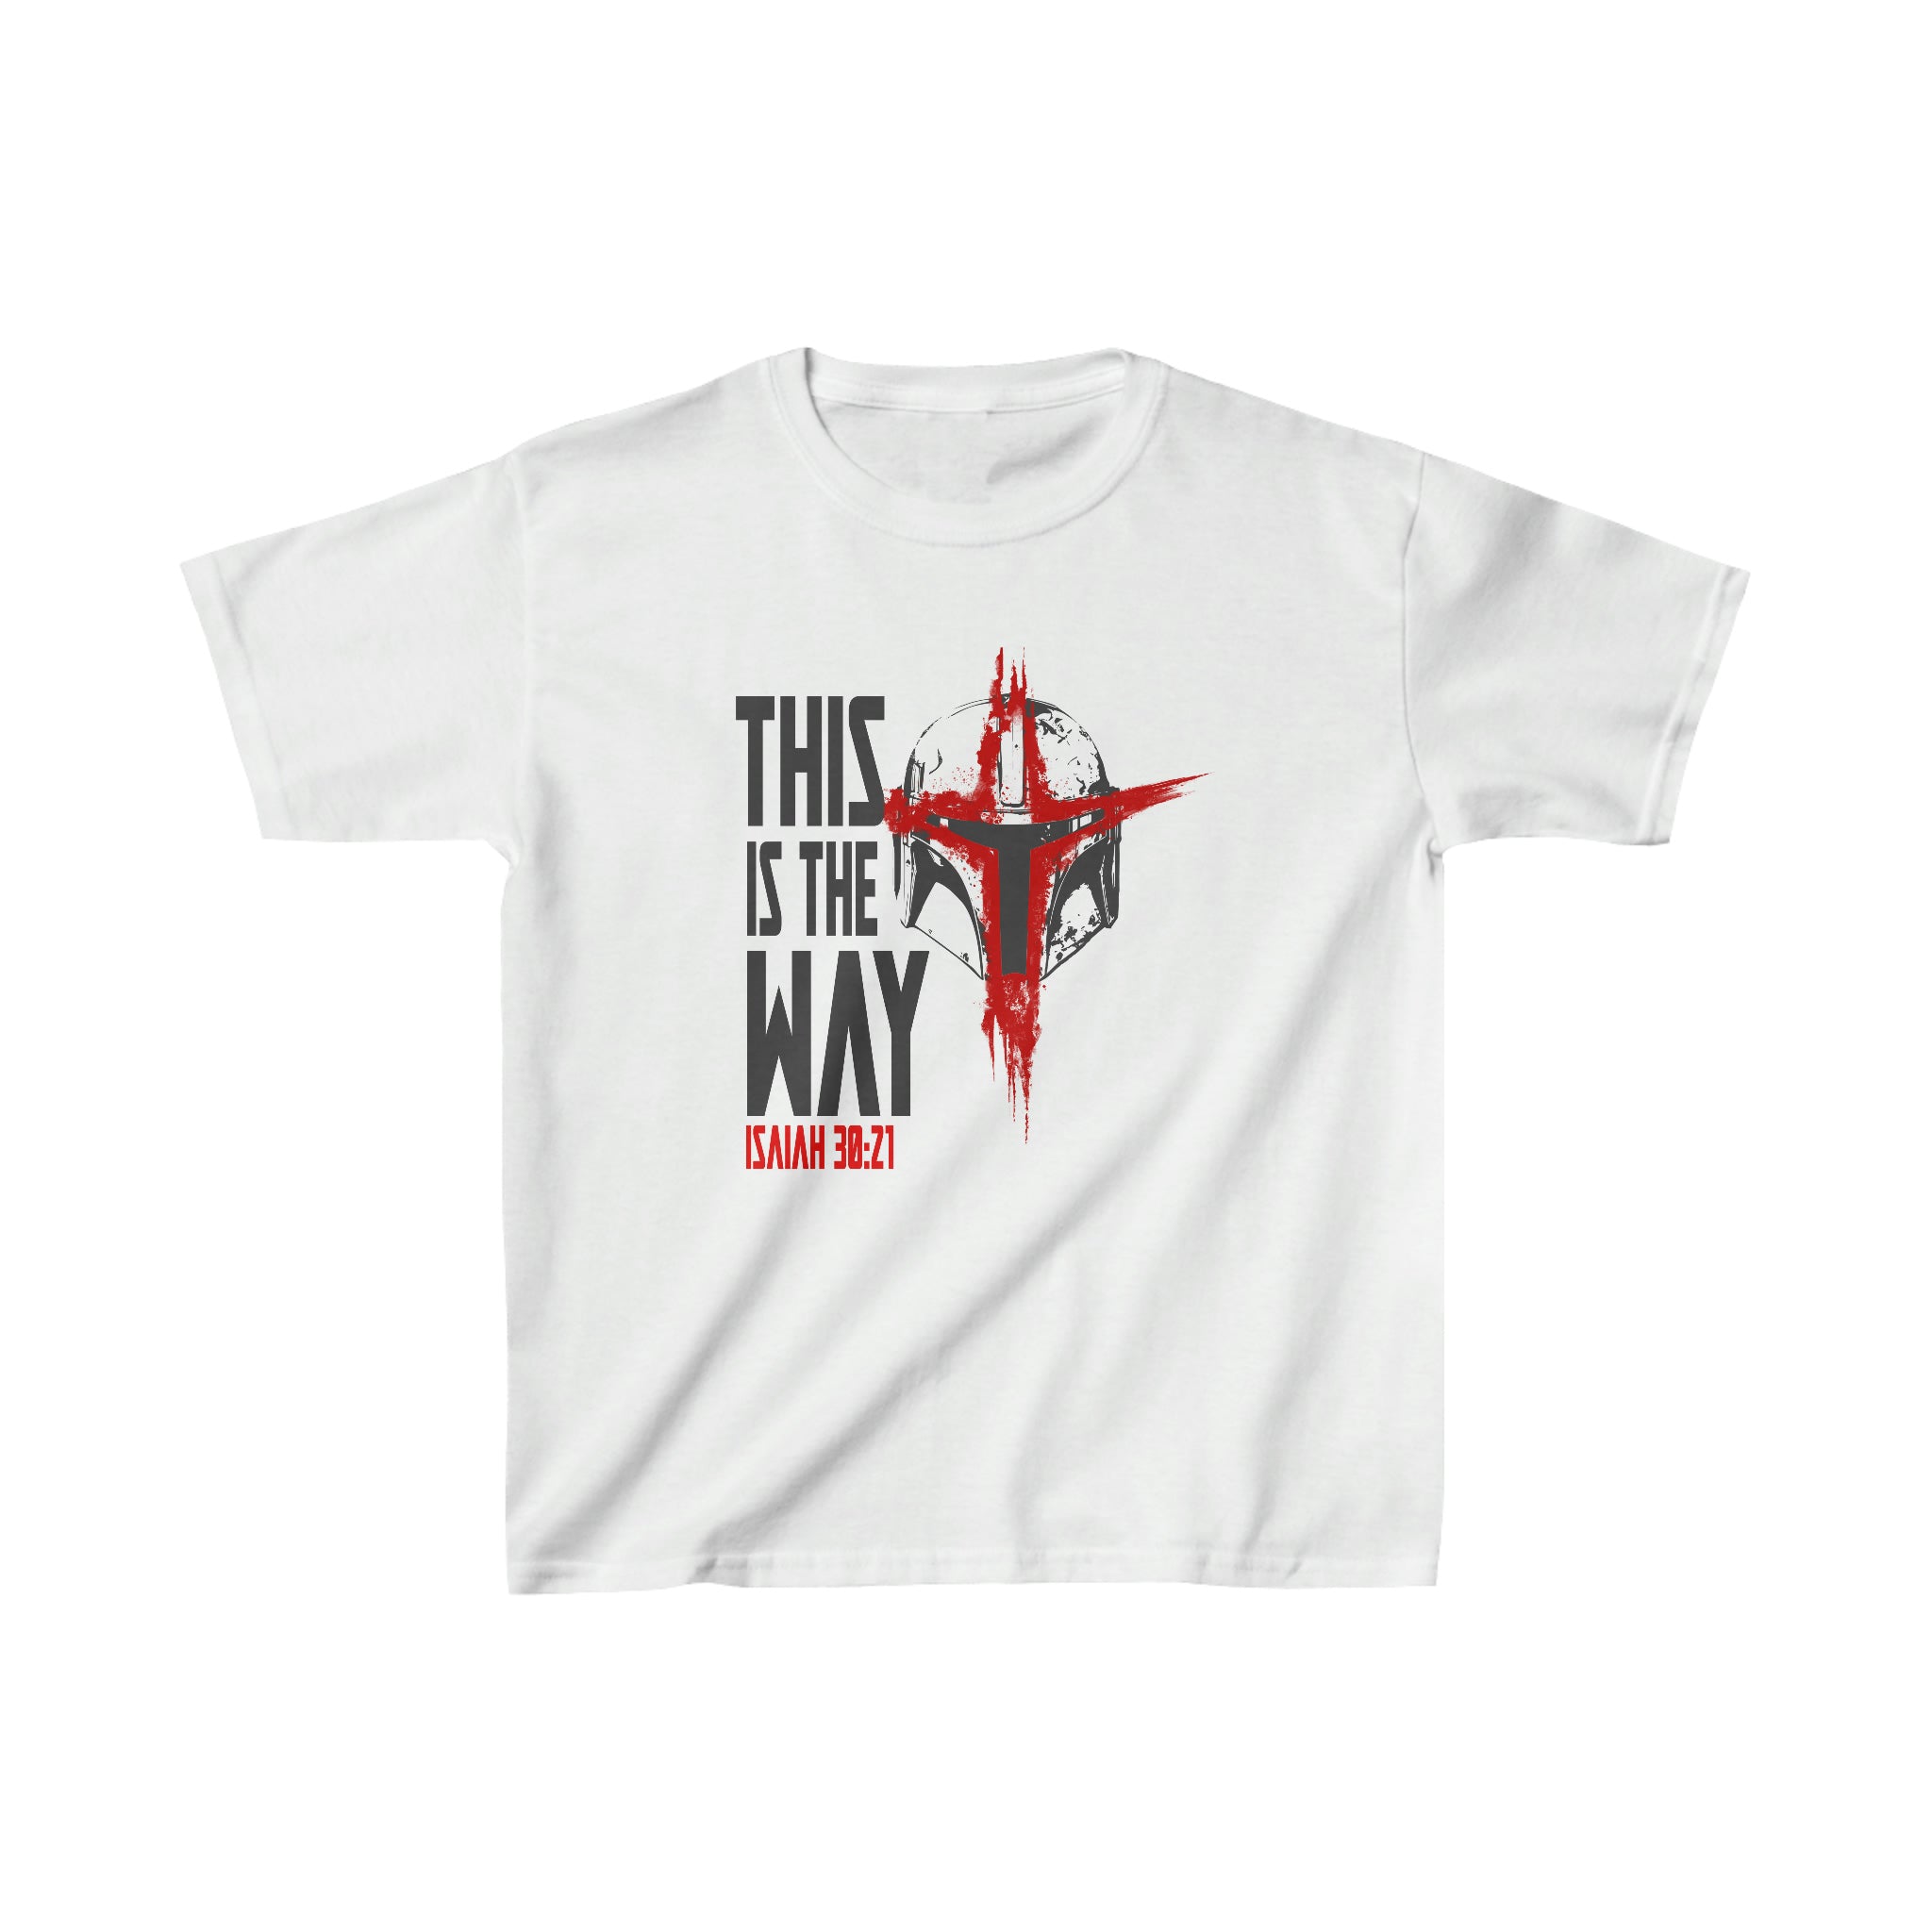 This Is The Way Kids Tee